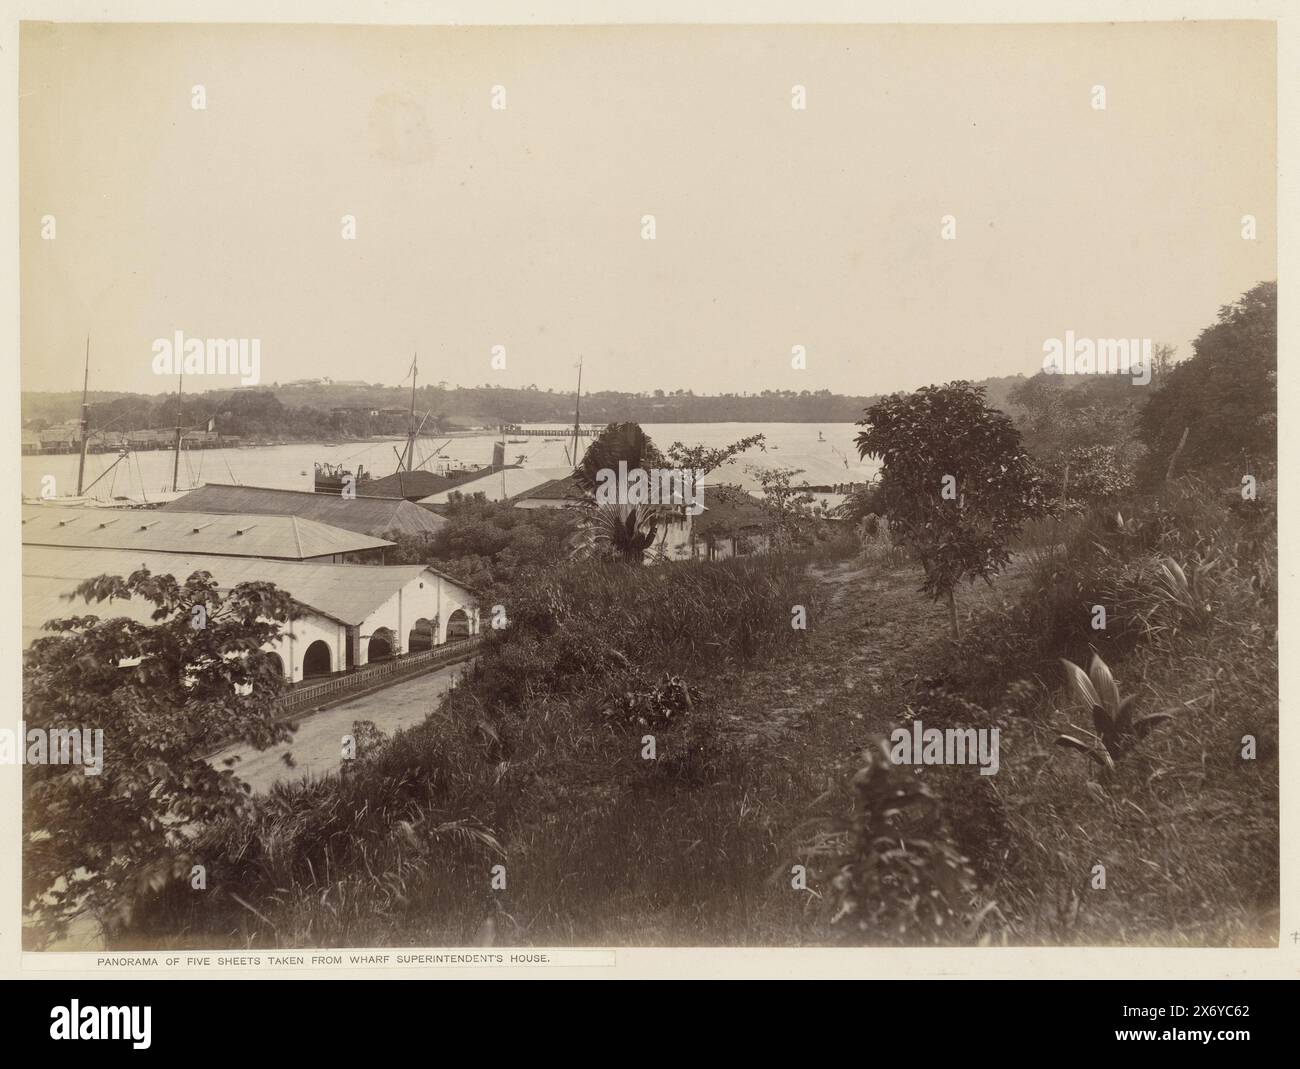 View of the buildings, quays and surroundings of the Tanjong Pagar Dock Co. Ltd. in Singapore, Panorama of five sheets taken from wharf superintendent's house (title on object), Panorama consisting of five prints. Part of Photo Album of the Tanjong Pagar Dock Co. Ltd. in Singapore., photograph, G.R. Lambert & Co., (attributed to), Singapore, c. 1890 - in or before 1905, photographic support, albumen print, height, 267 mm × width, 361 mm, height c. 267 mm × width c. 1715 mm Stock Photo